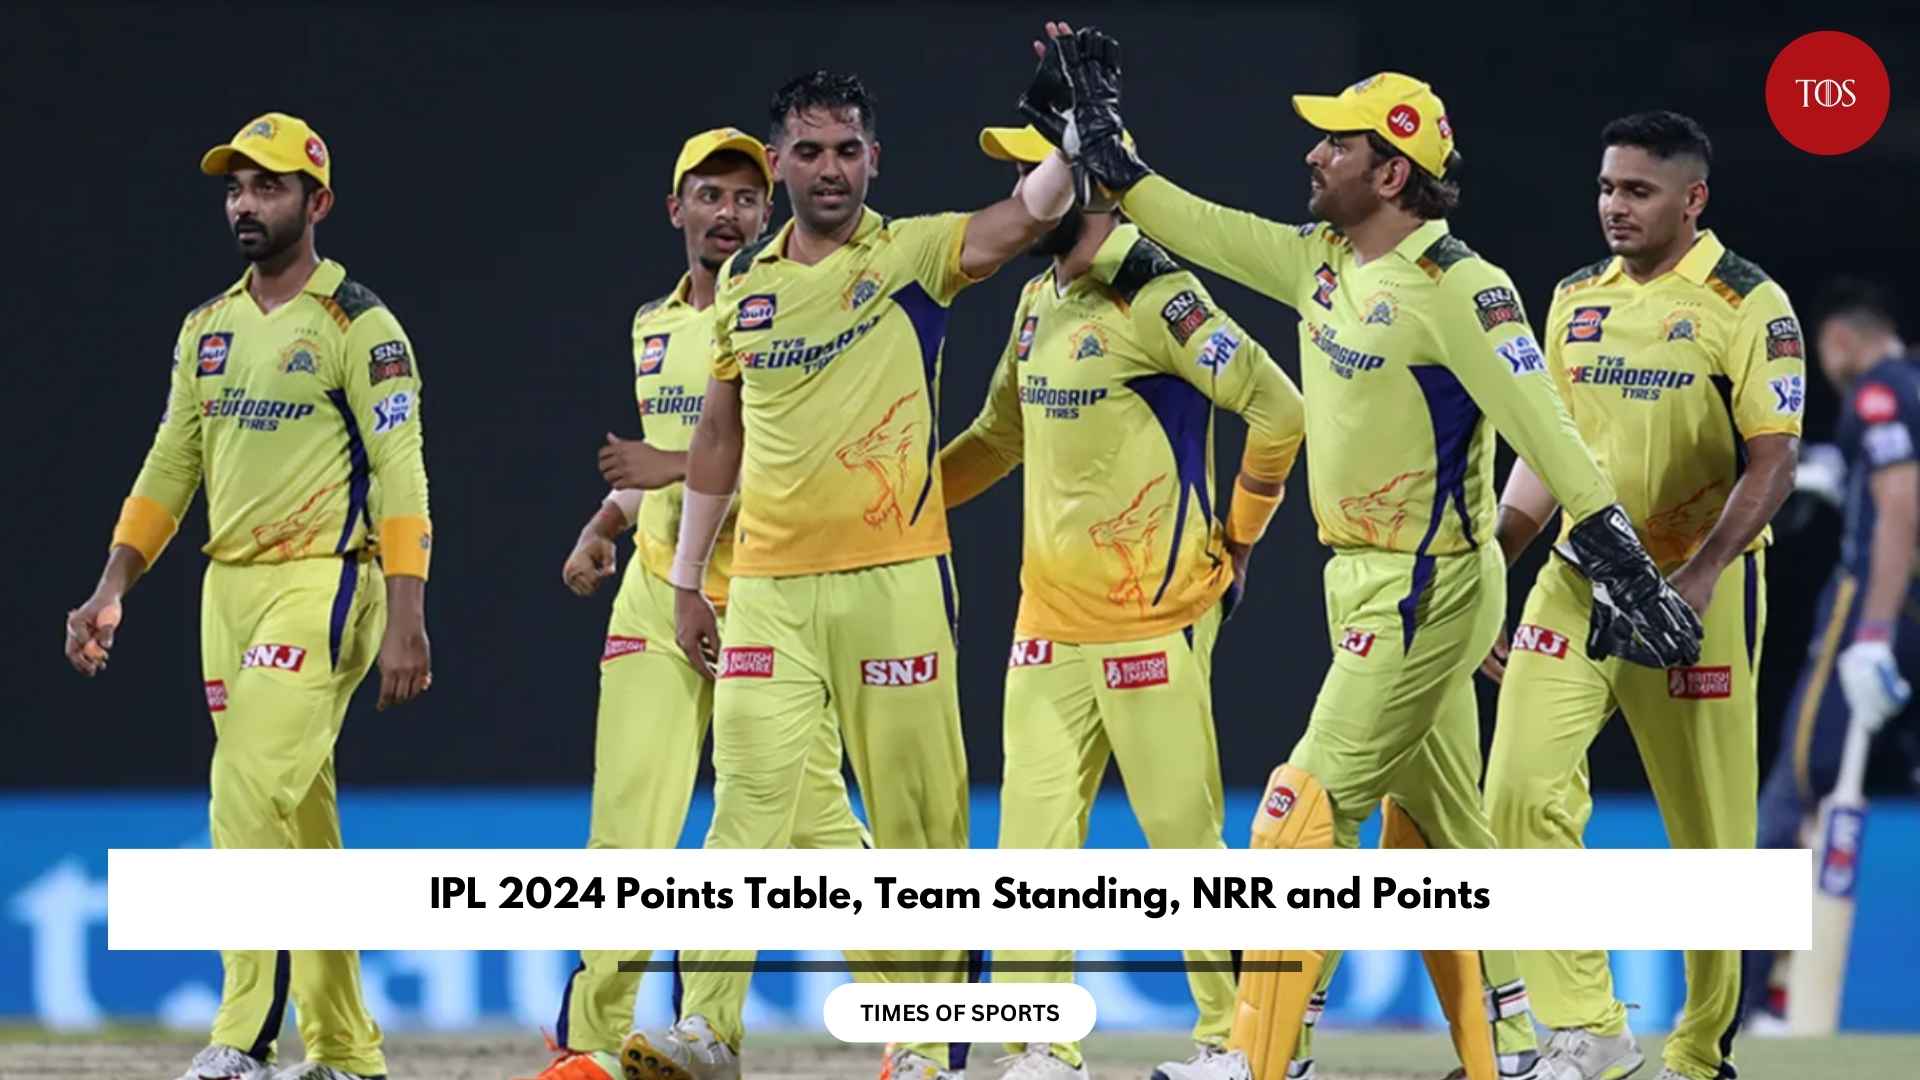 IPL 2024 Points Table, Team Standing, NRR and Points